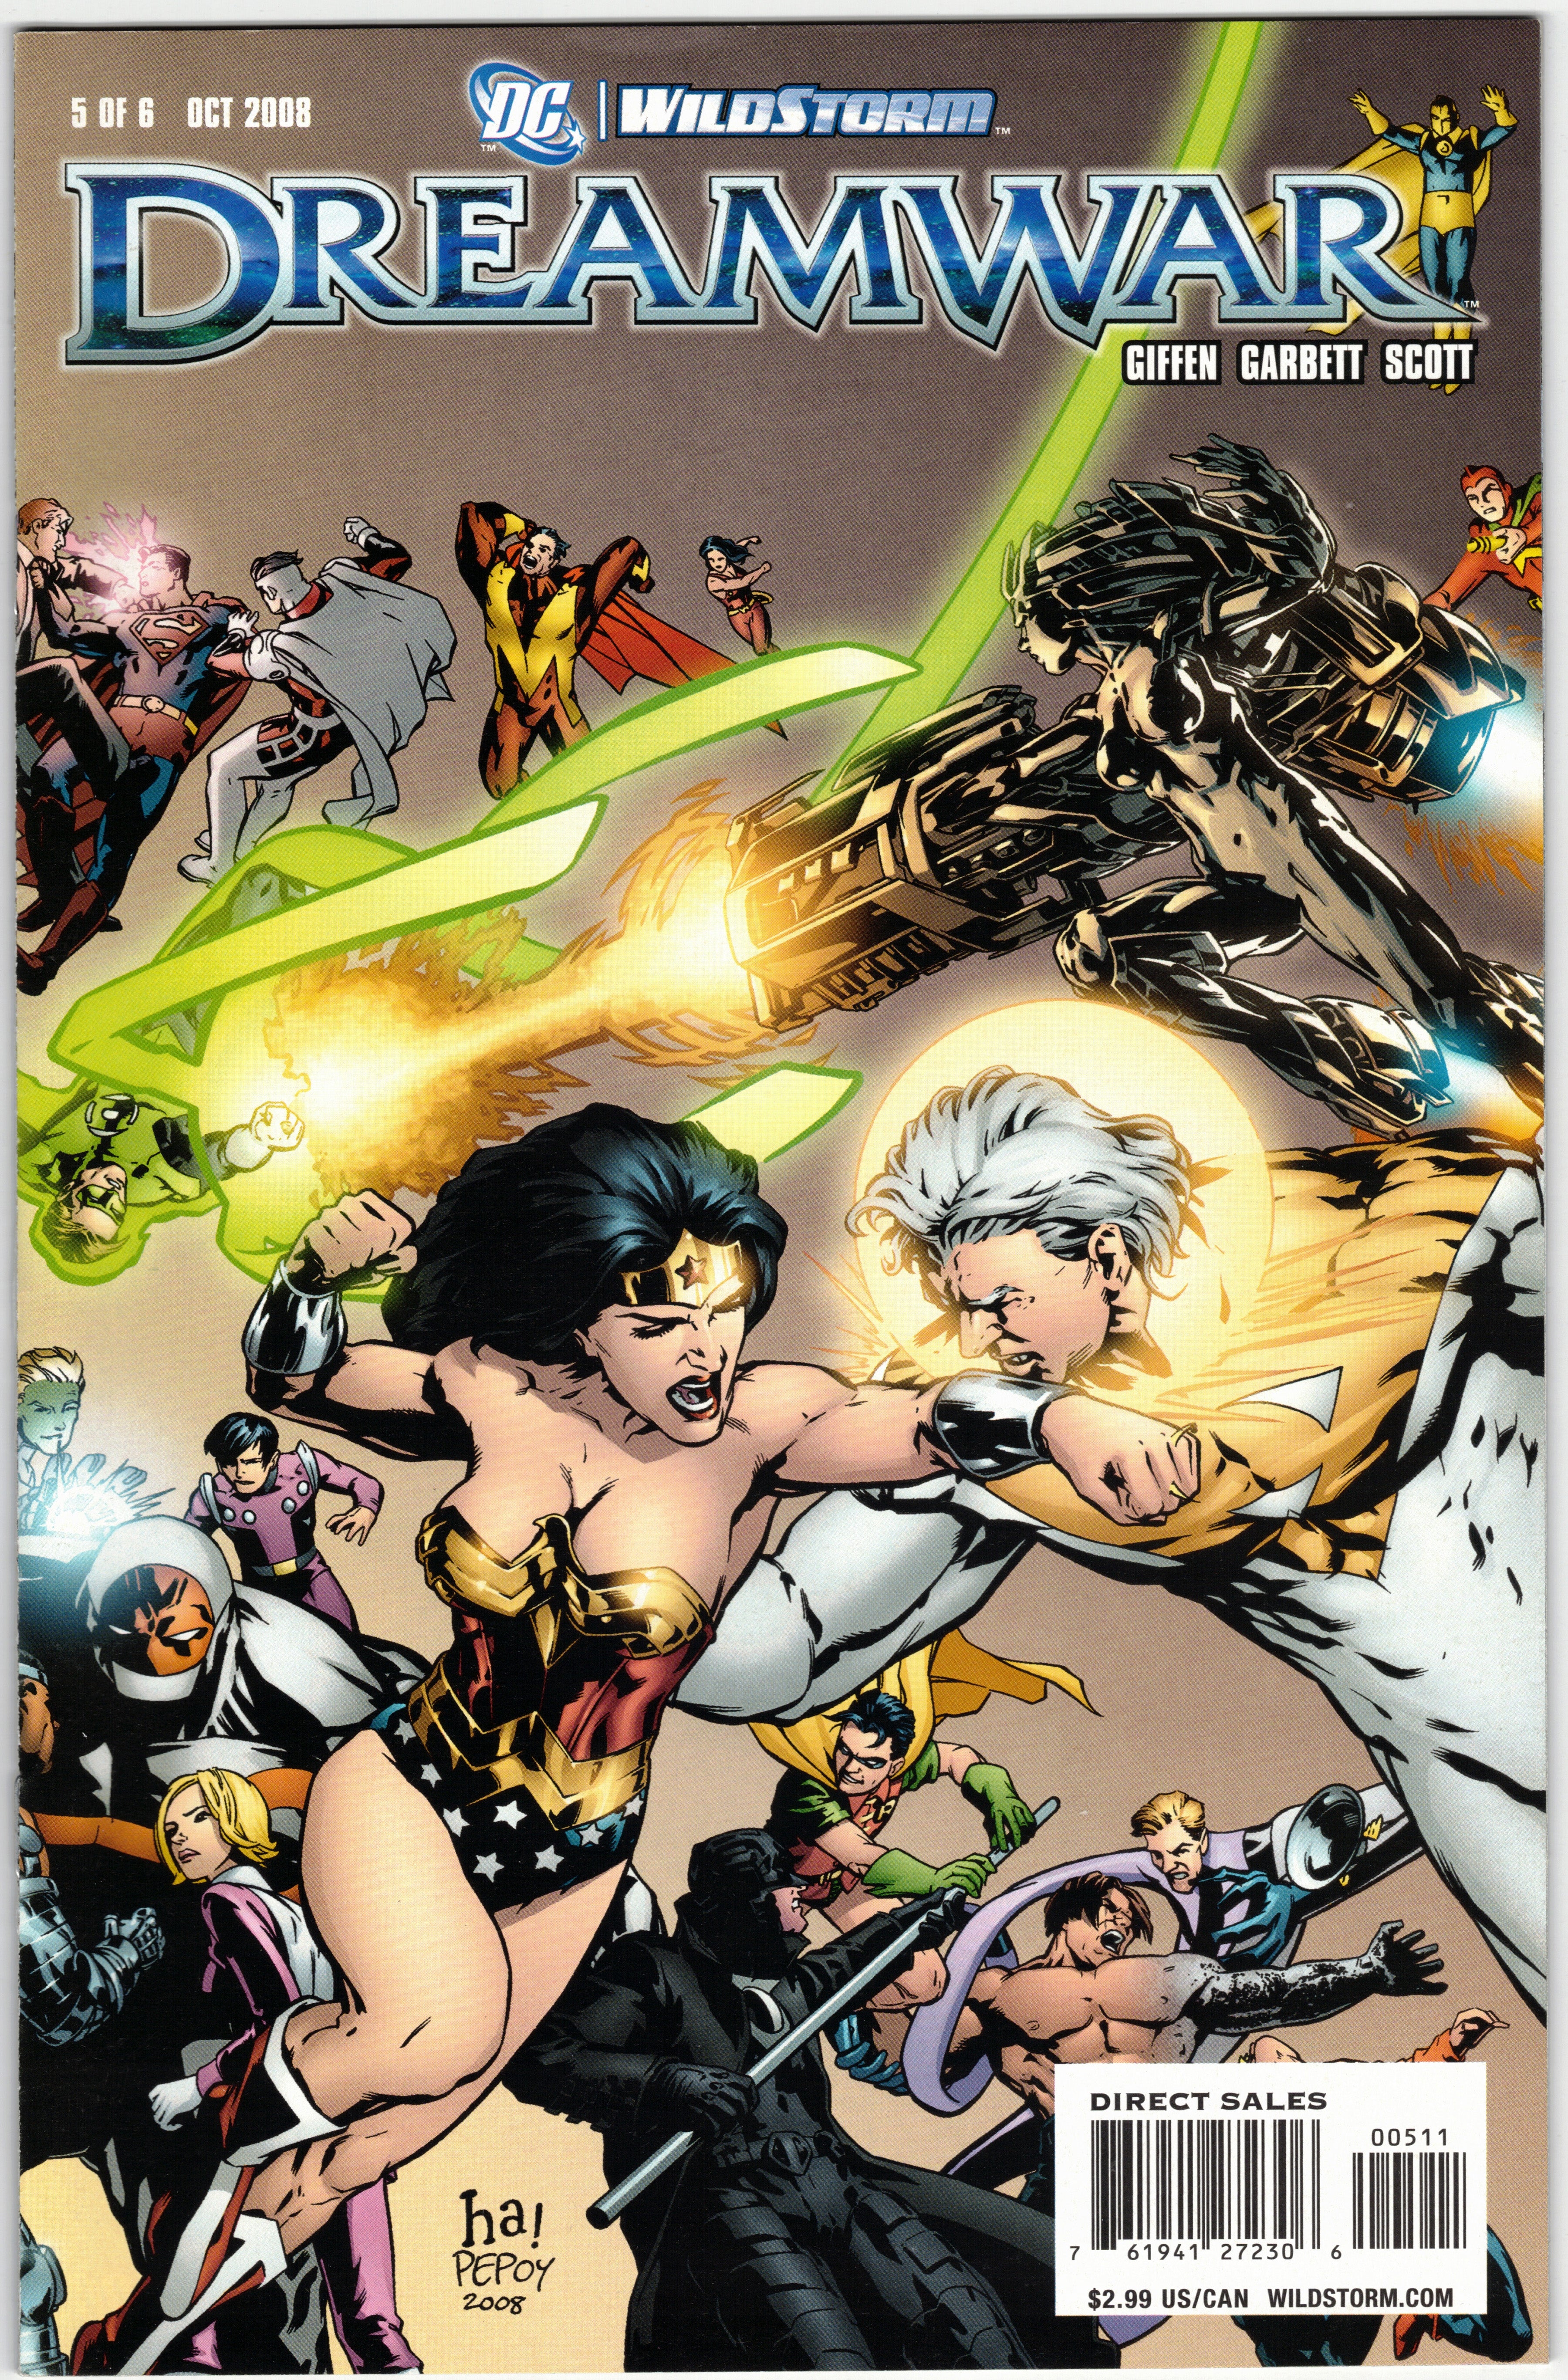 Photo of DC/WS DreamWar (2008) Issue 5 Comic sold by Stronghold Collectibles